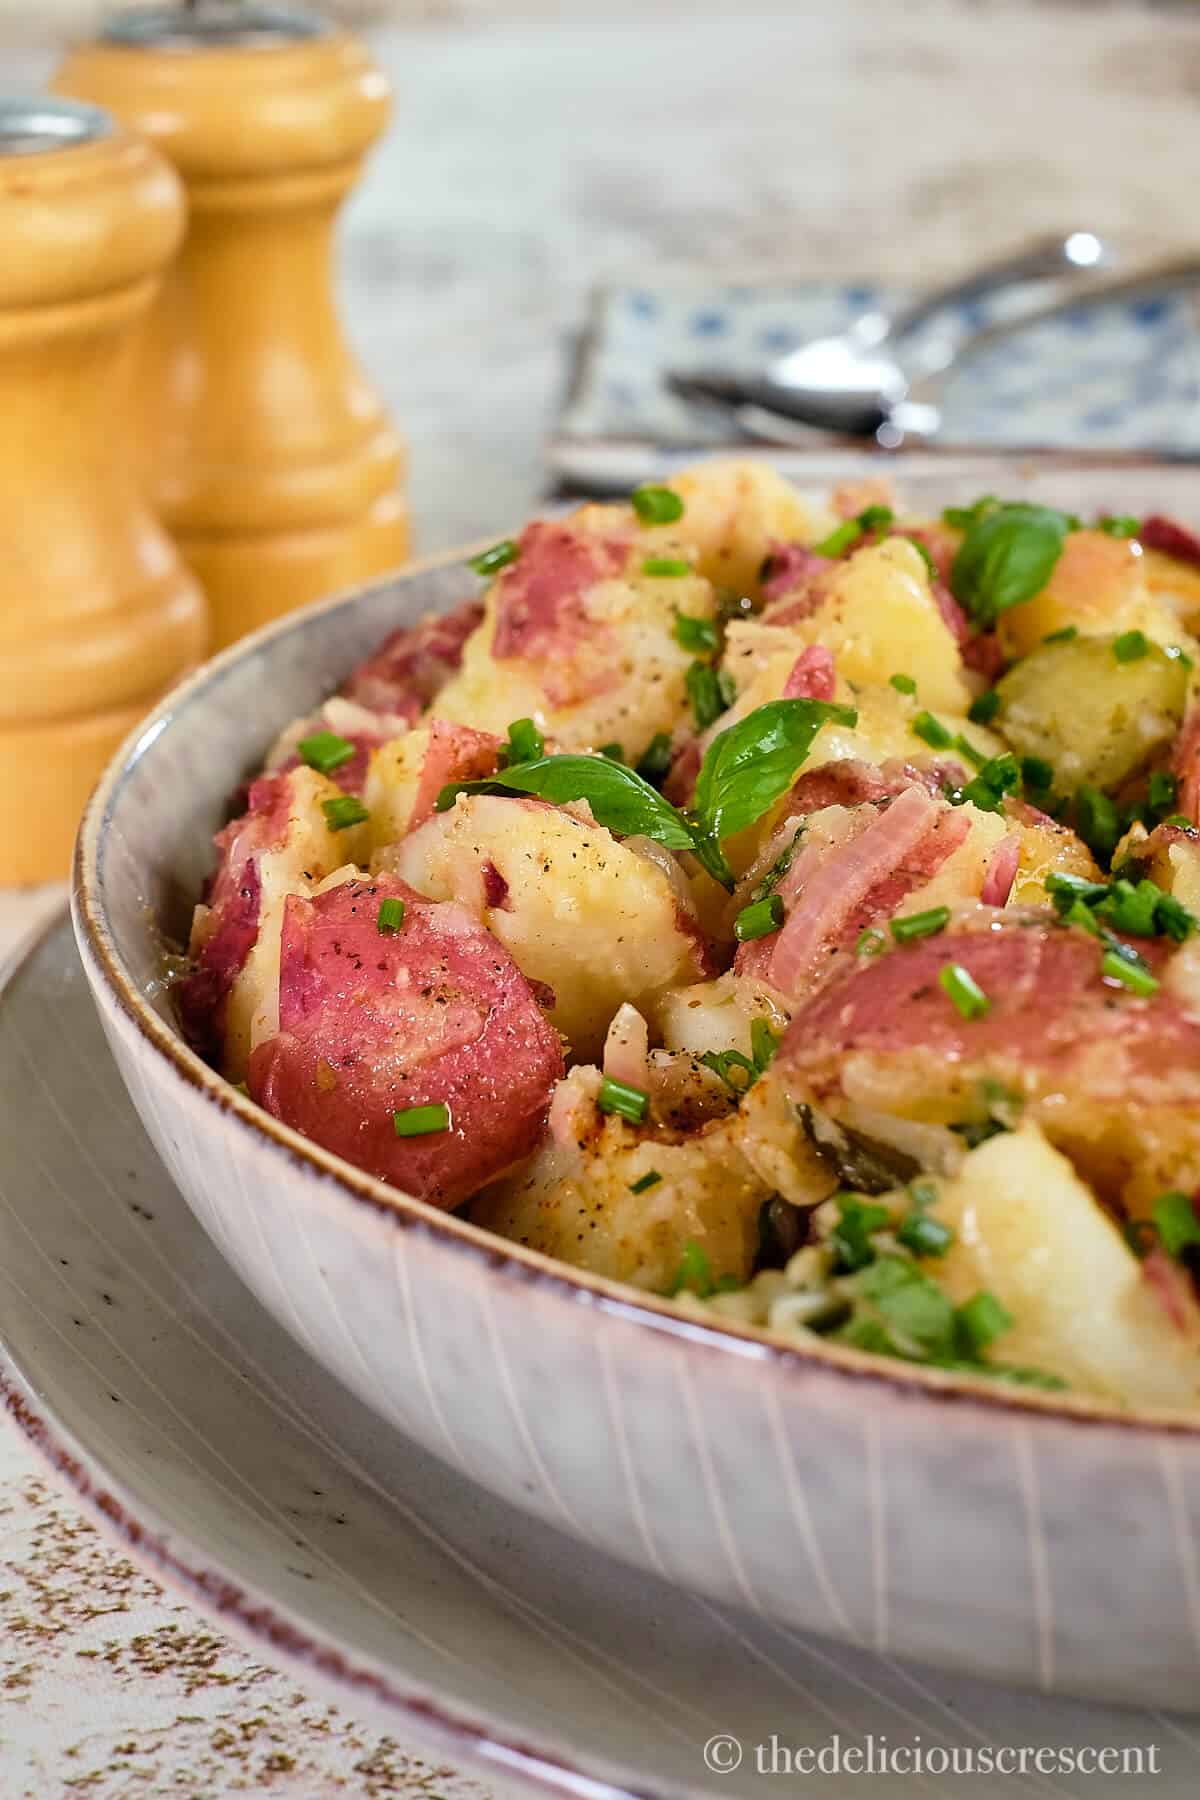 Red potato salad topped with herbs.